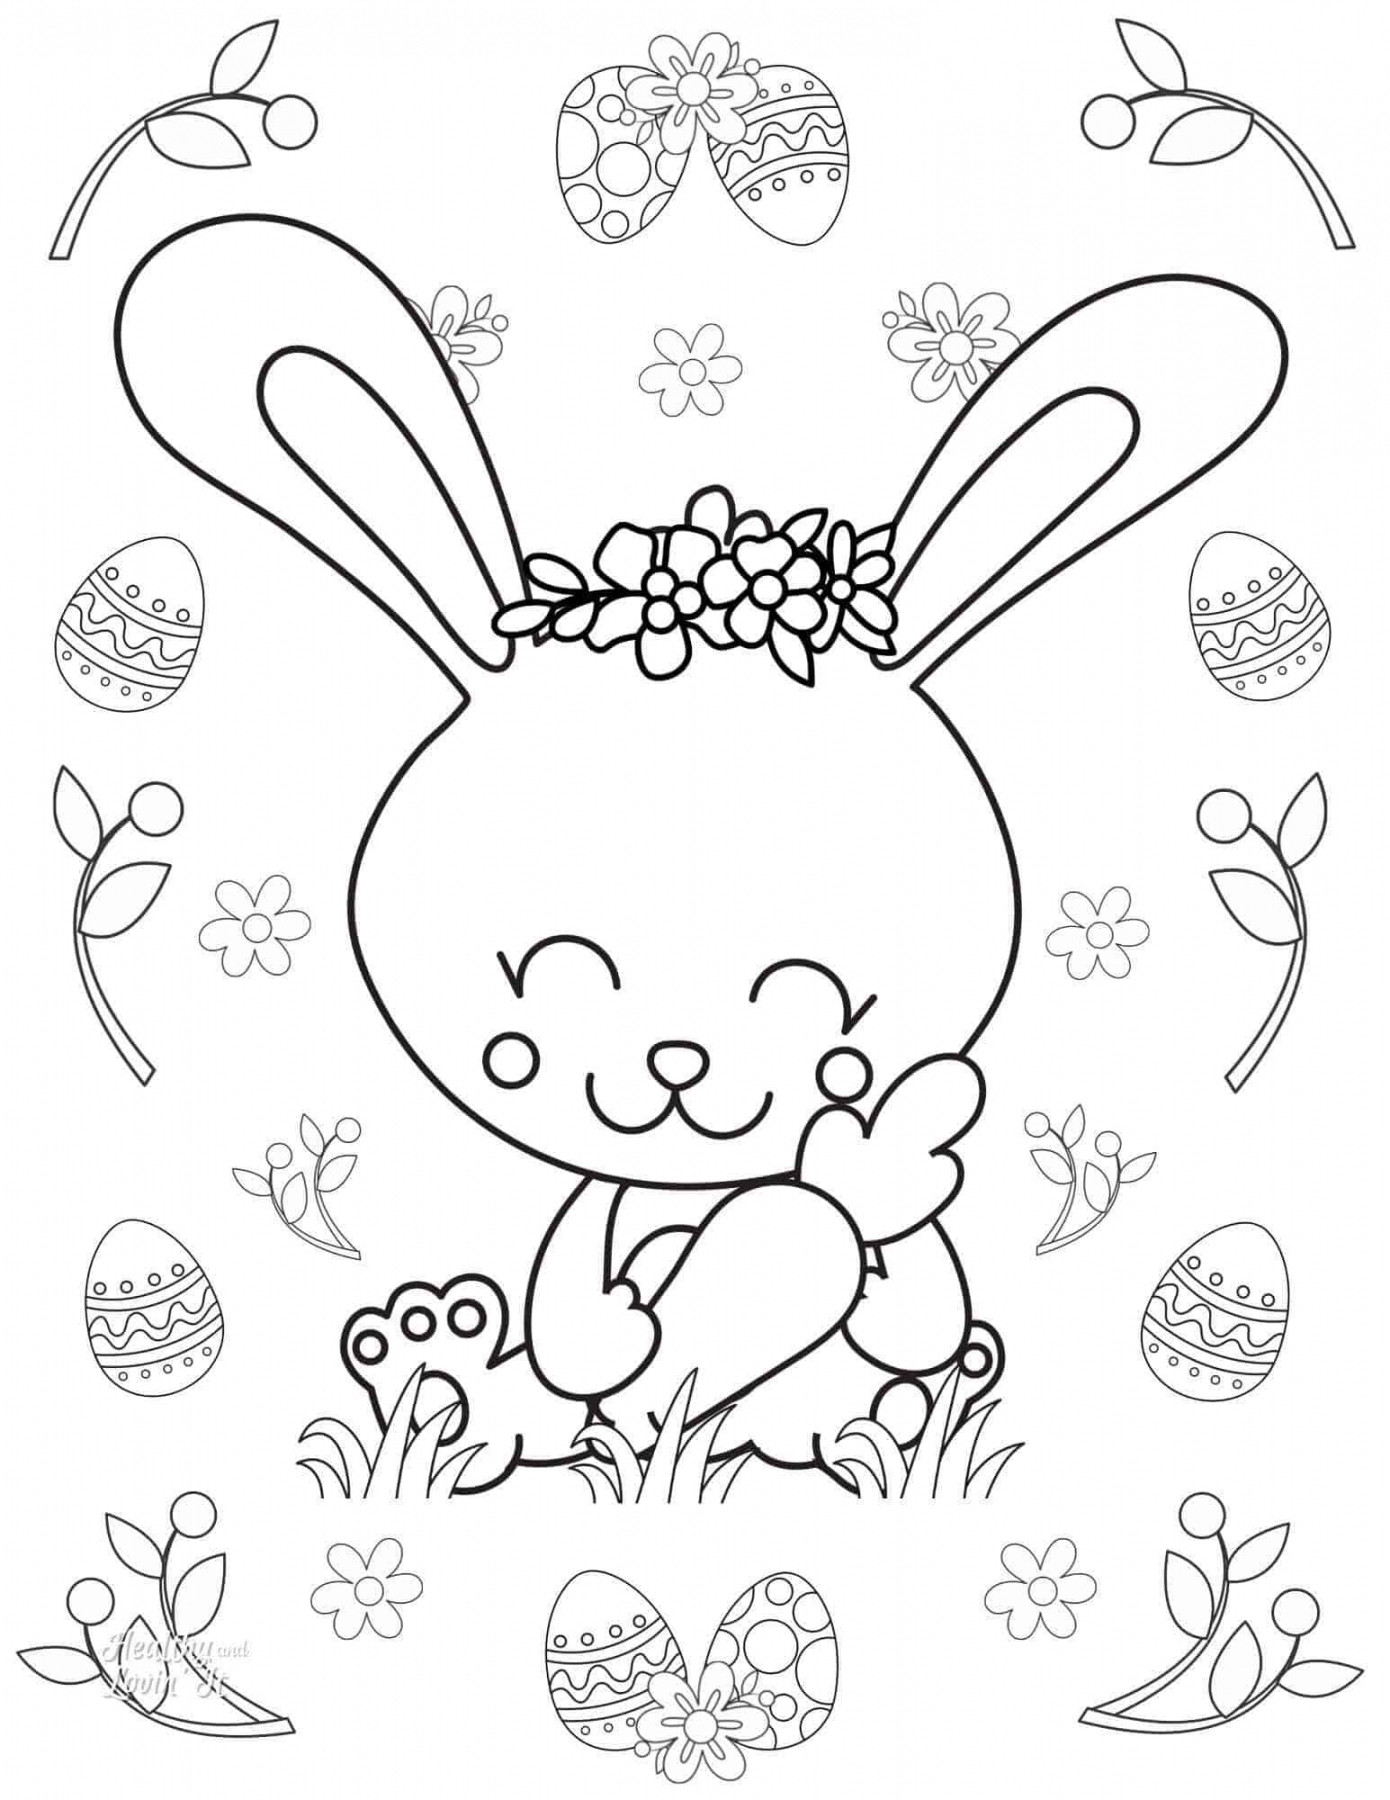 Free Printable Coloring Pages Easter - Printable - Cute Easter Coloring Pages - Free Printables!